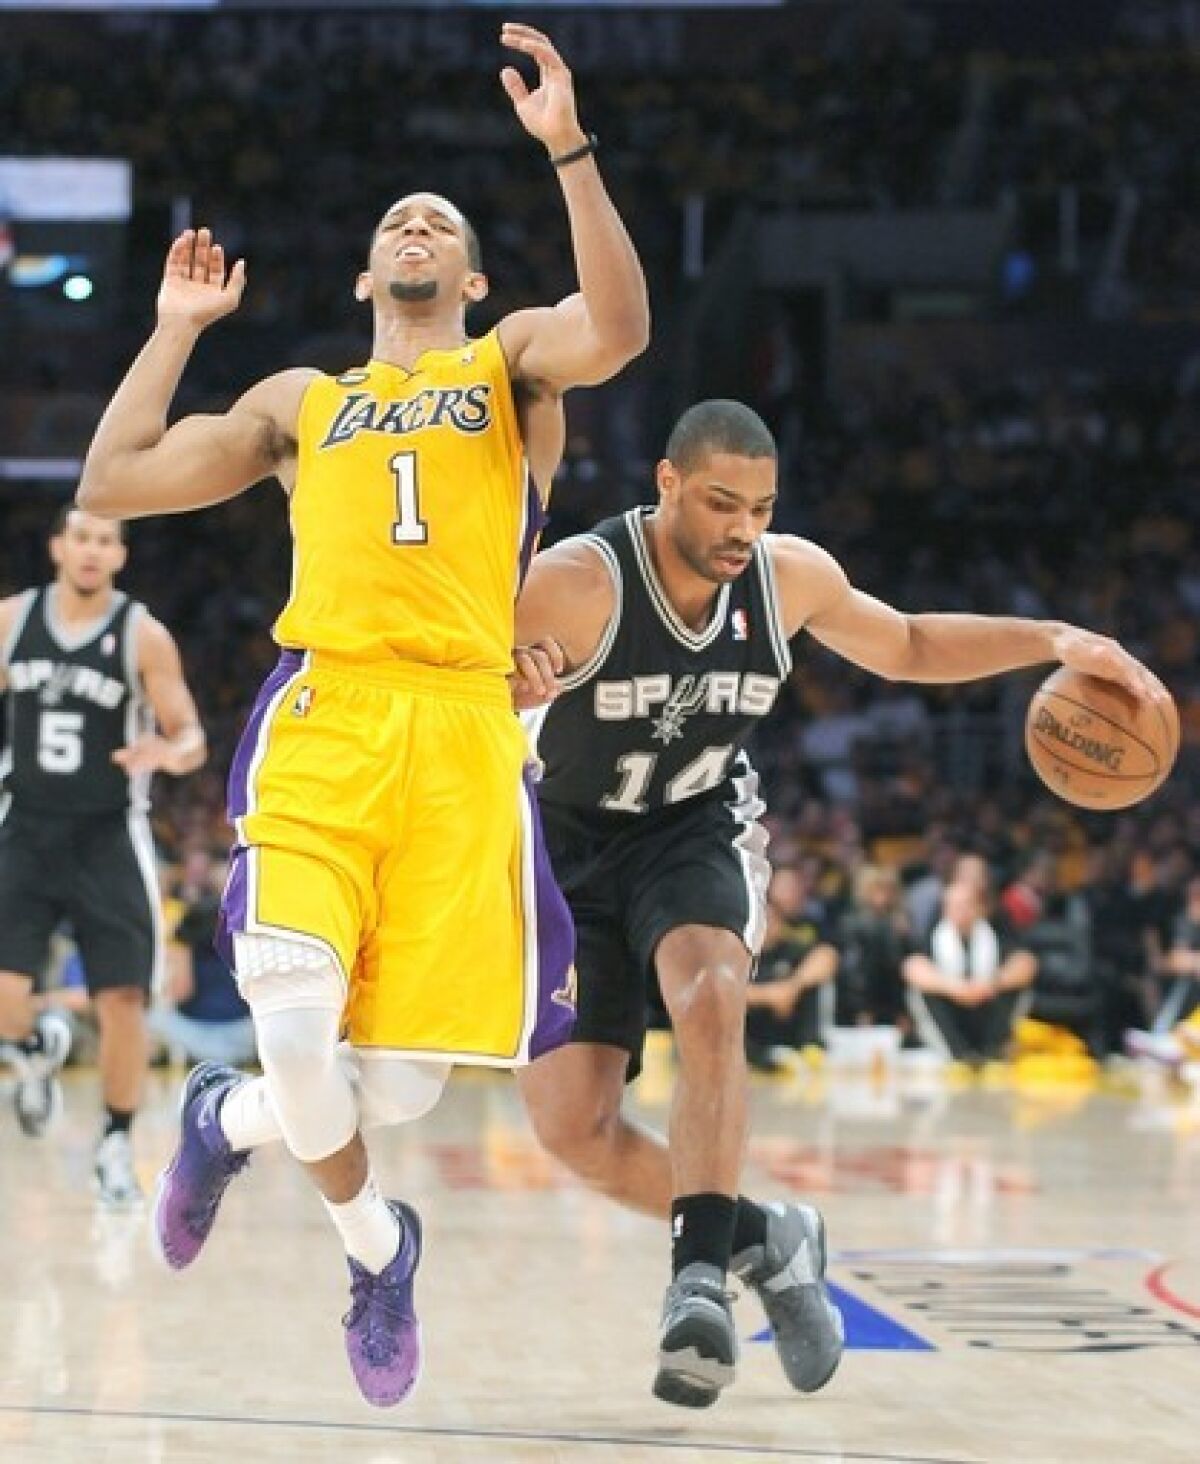 Lakers guard Darius Morris contests a breakaway by Spurs guard Gary Neal in Game 3 of their first-round playoff series on April 26.